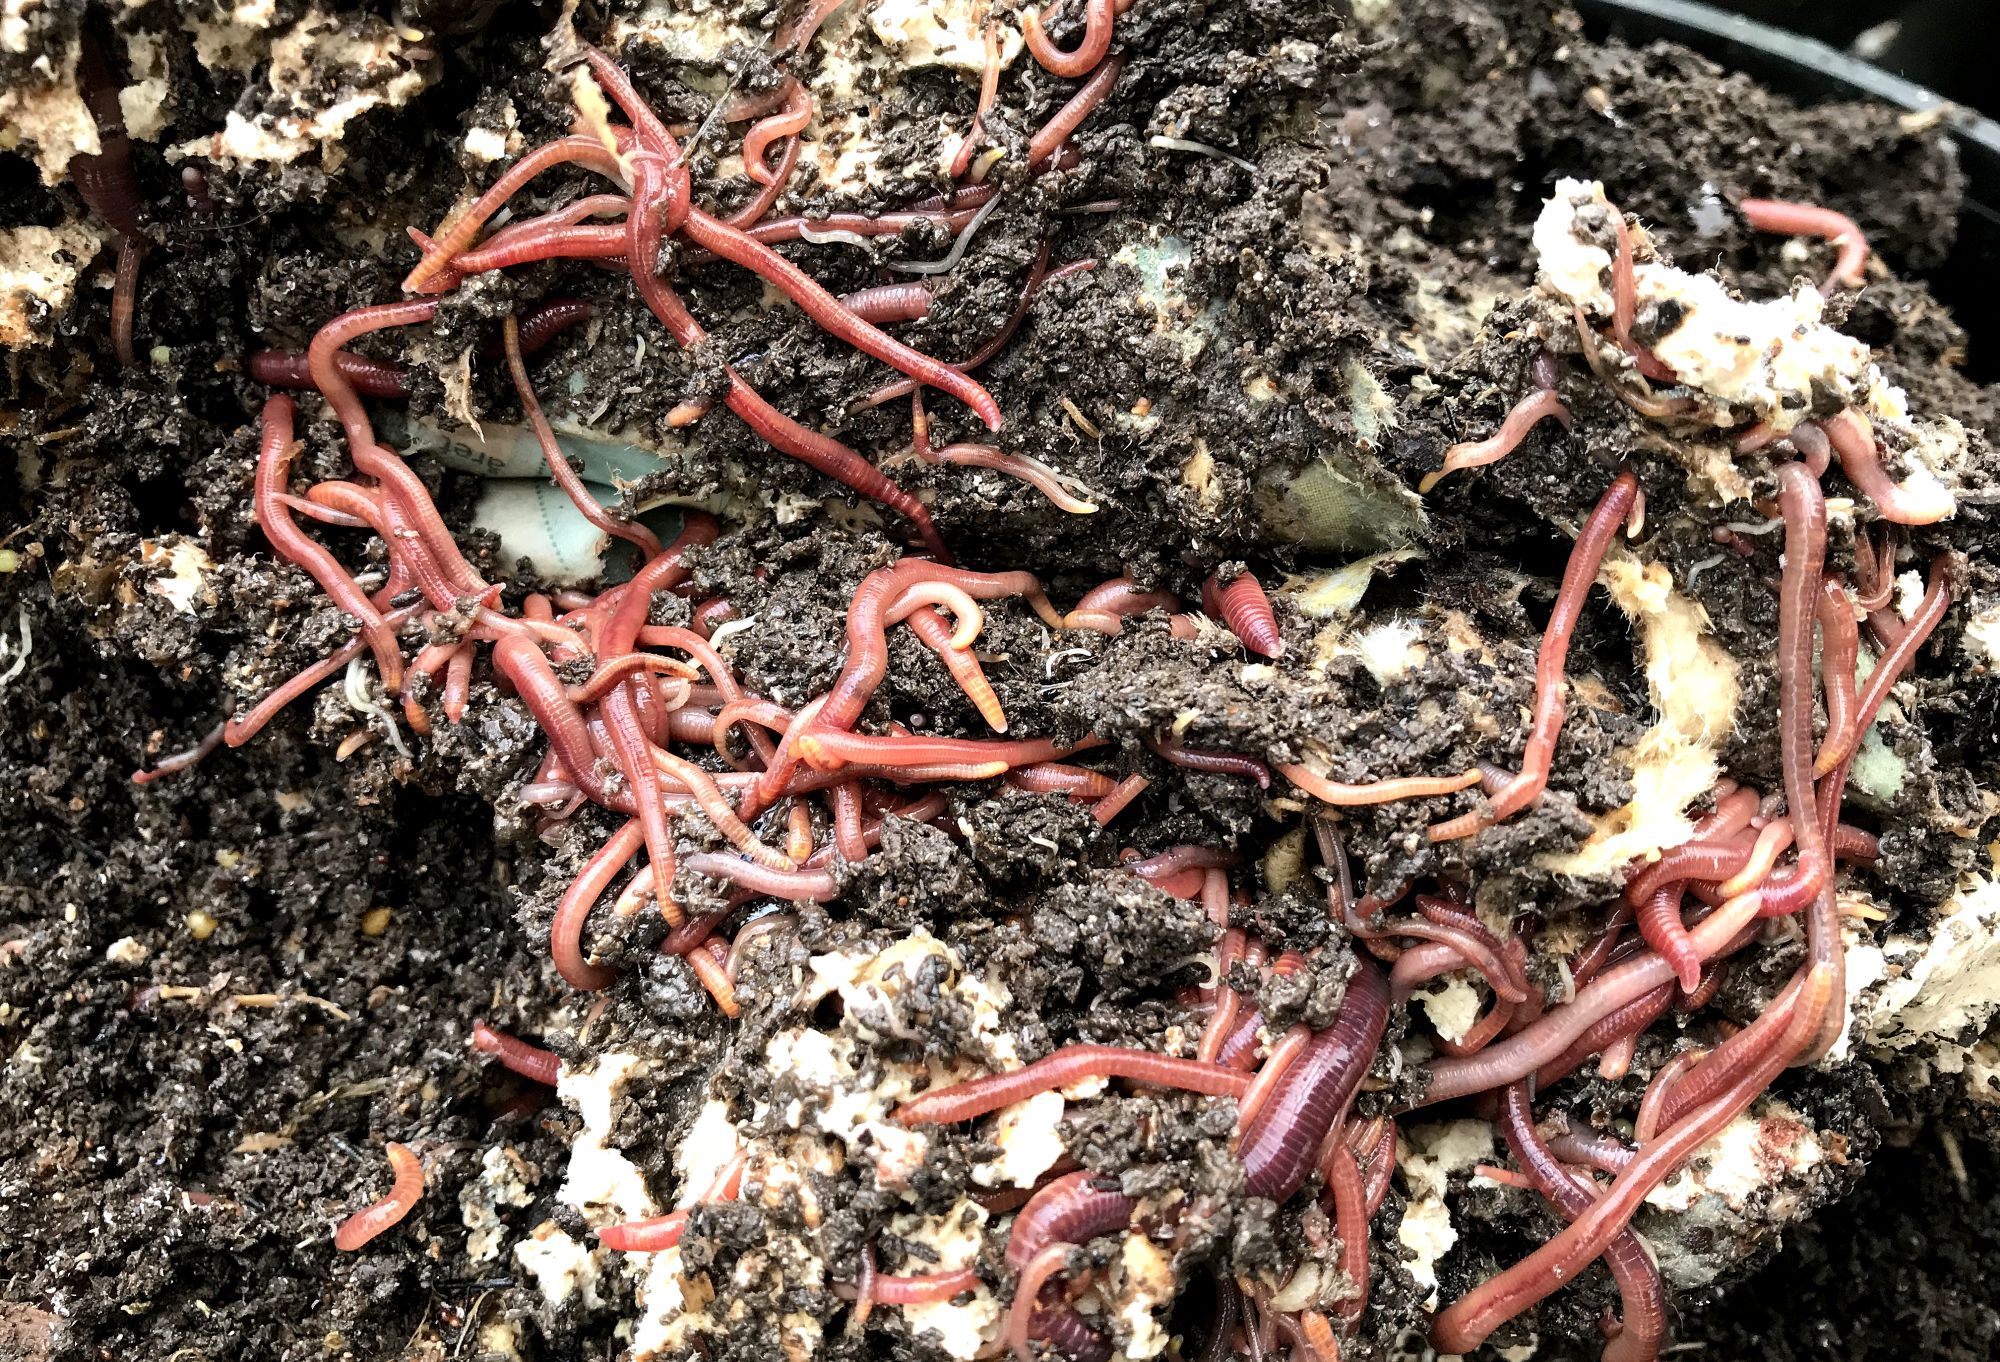 How to Catch Worms in Your Backyard - No Digging - How to Find